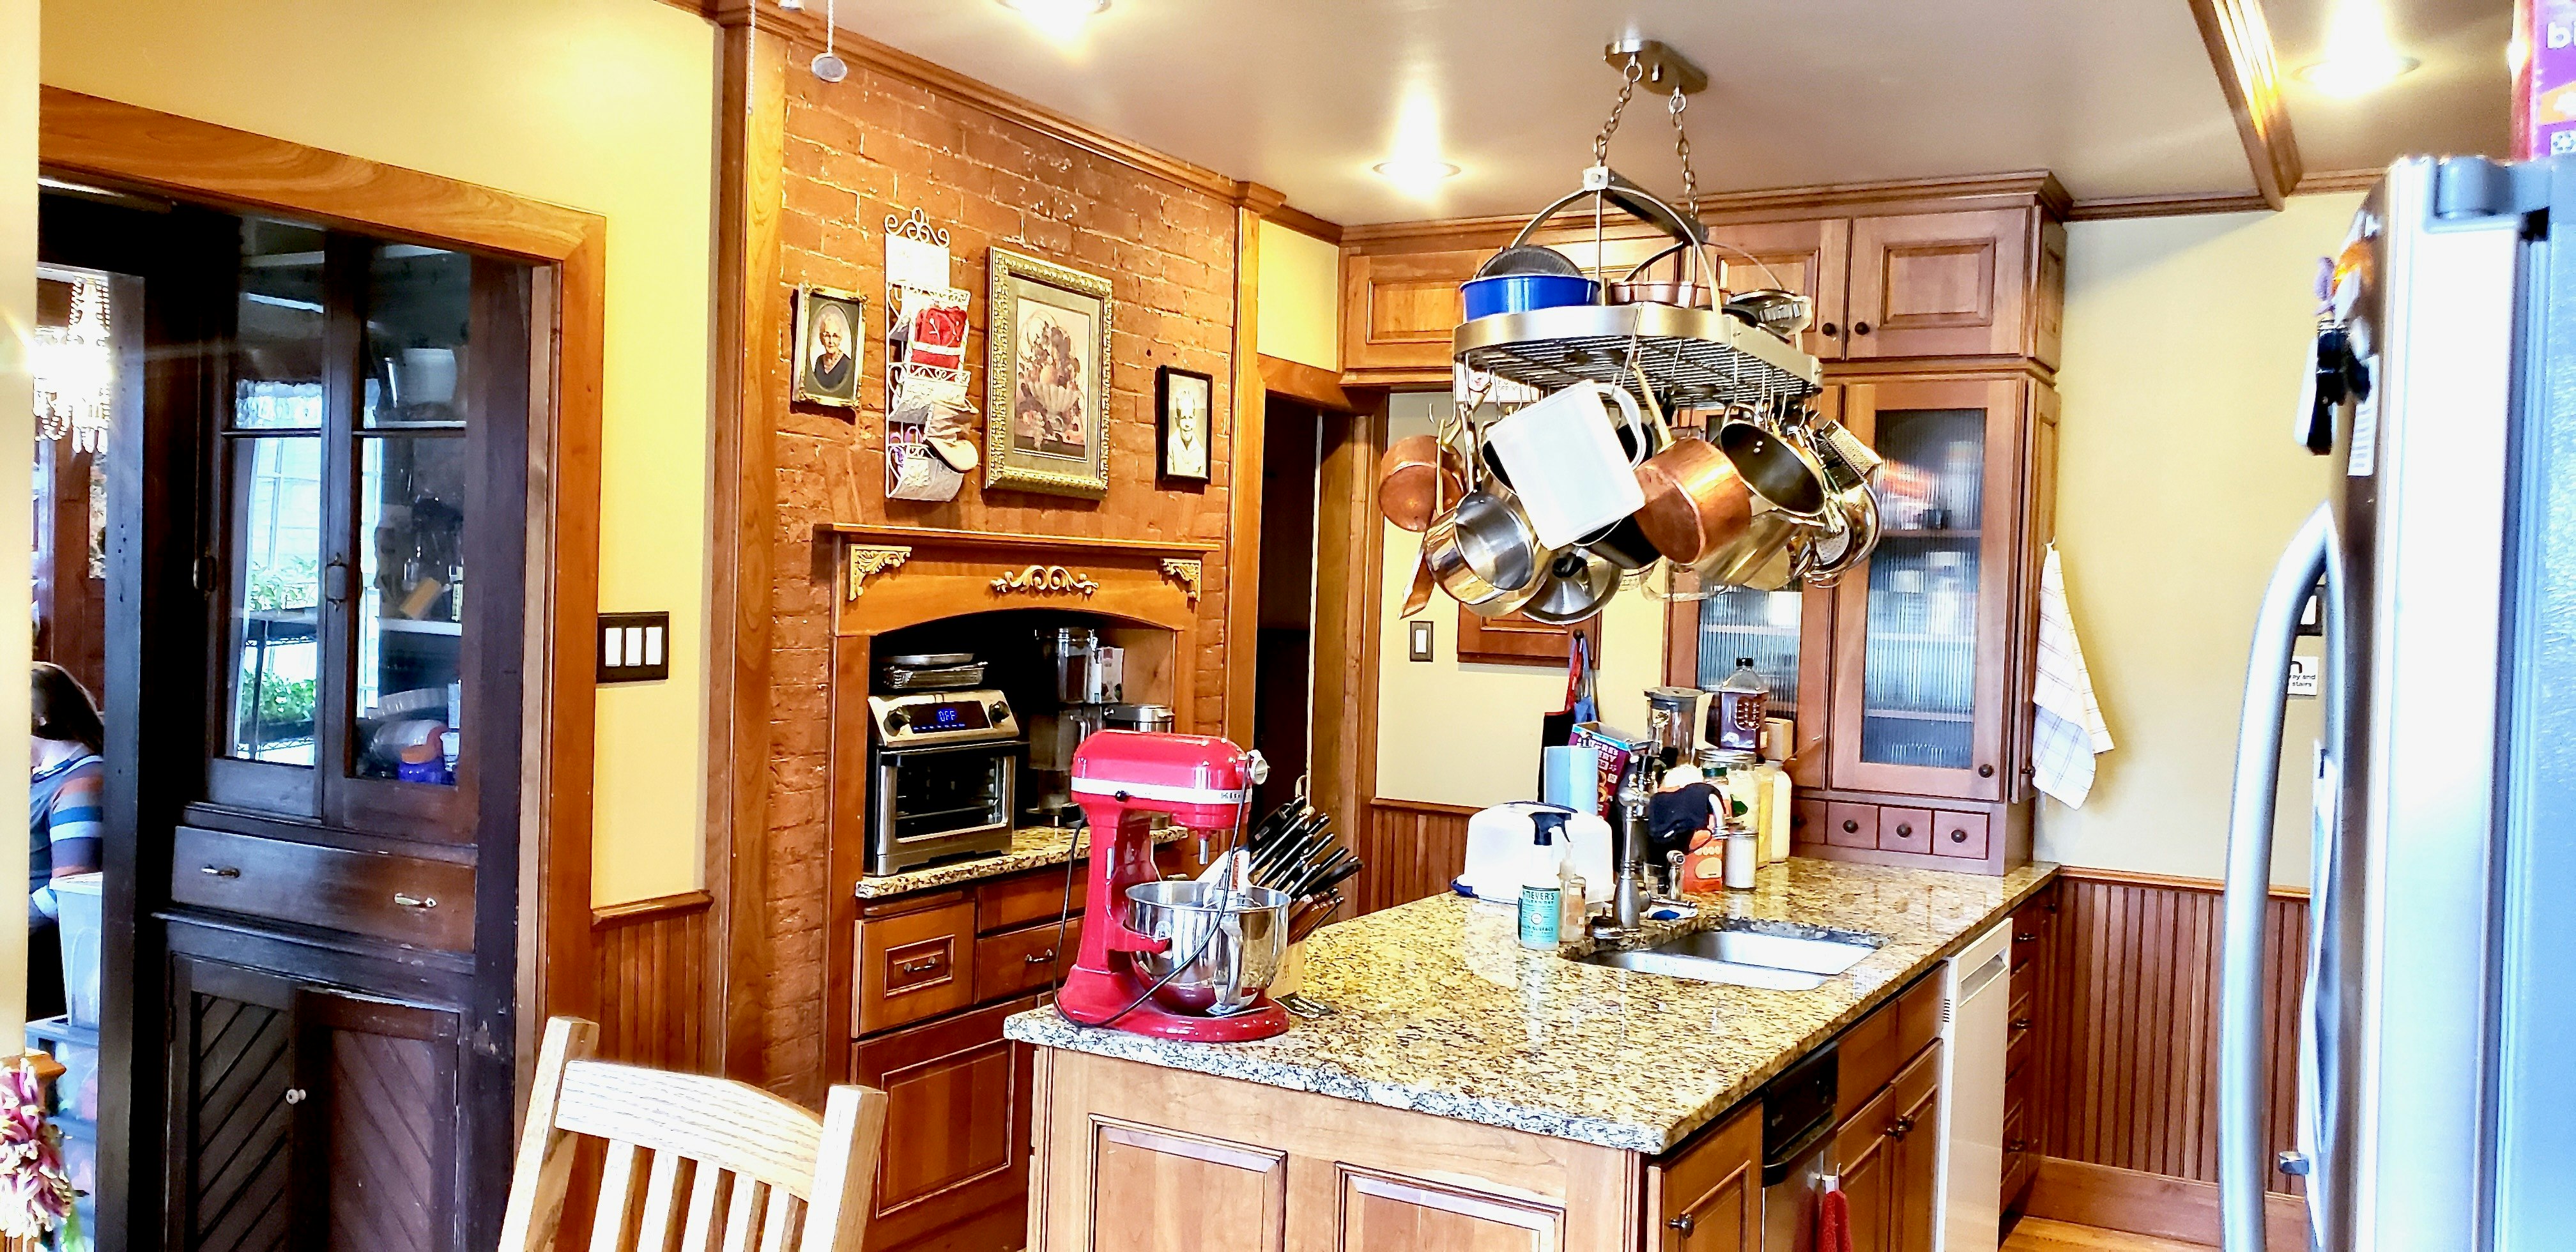 The kitchen in the Sturgis House has been modernized, but still has an authentic antique feel.